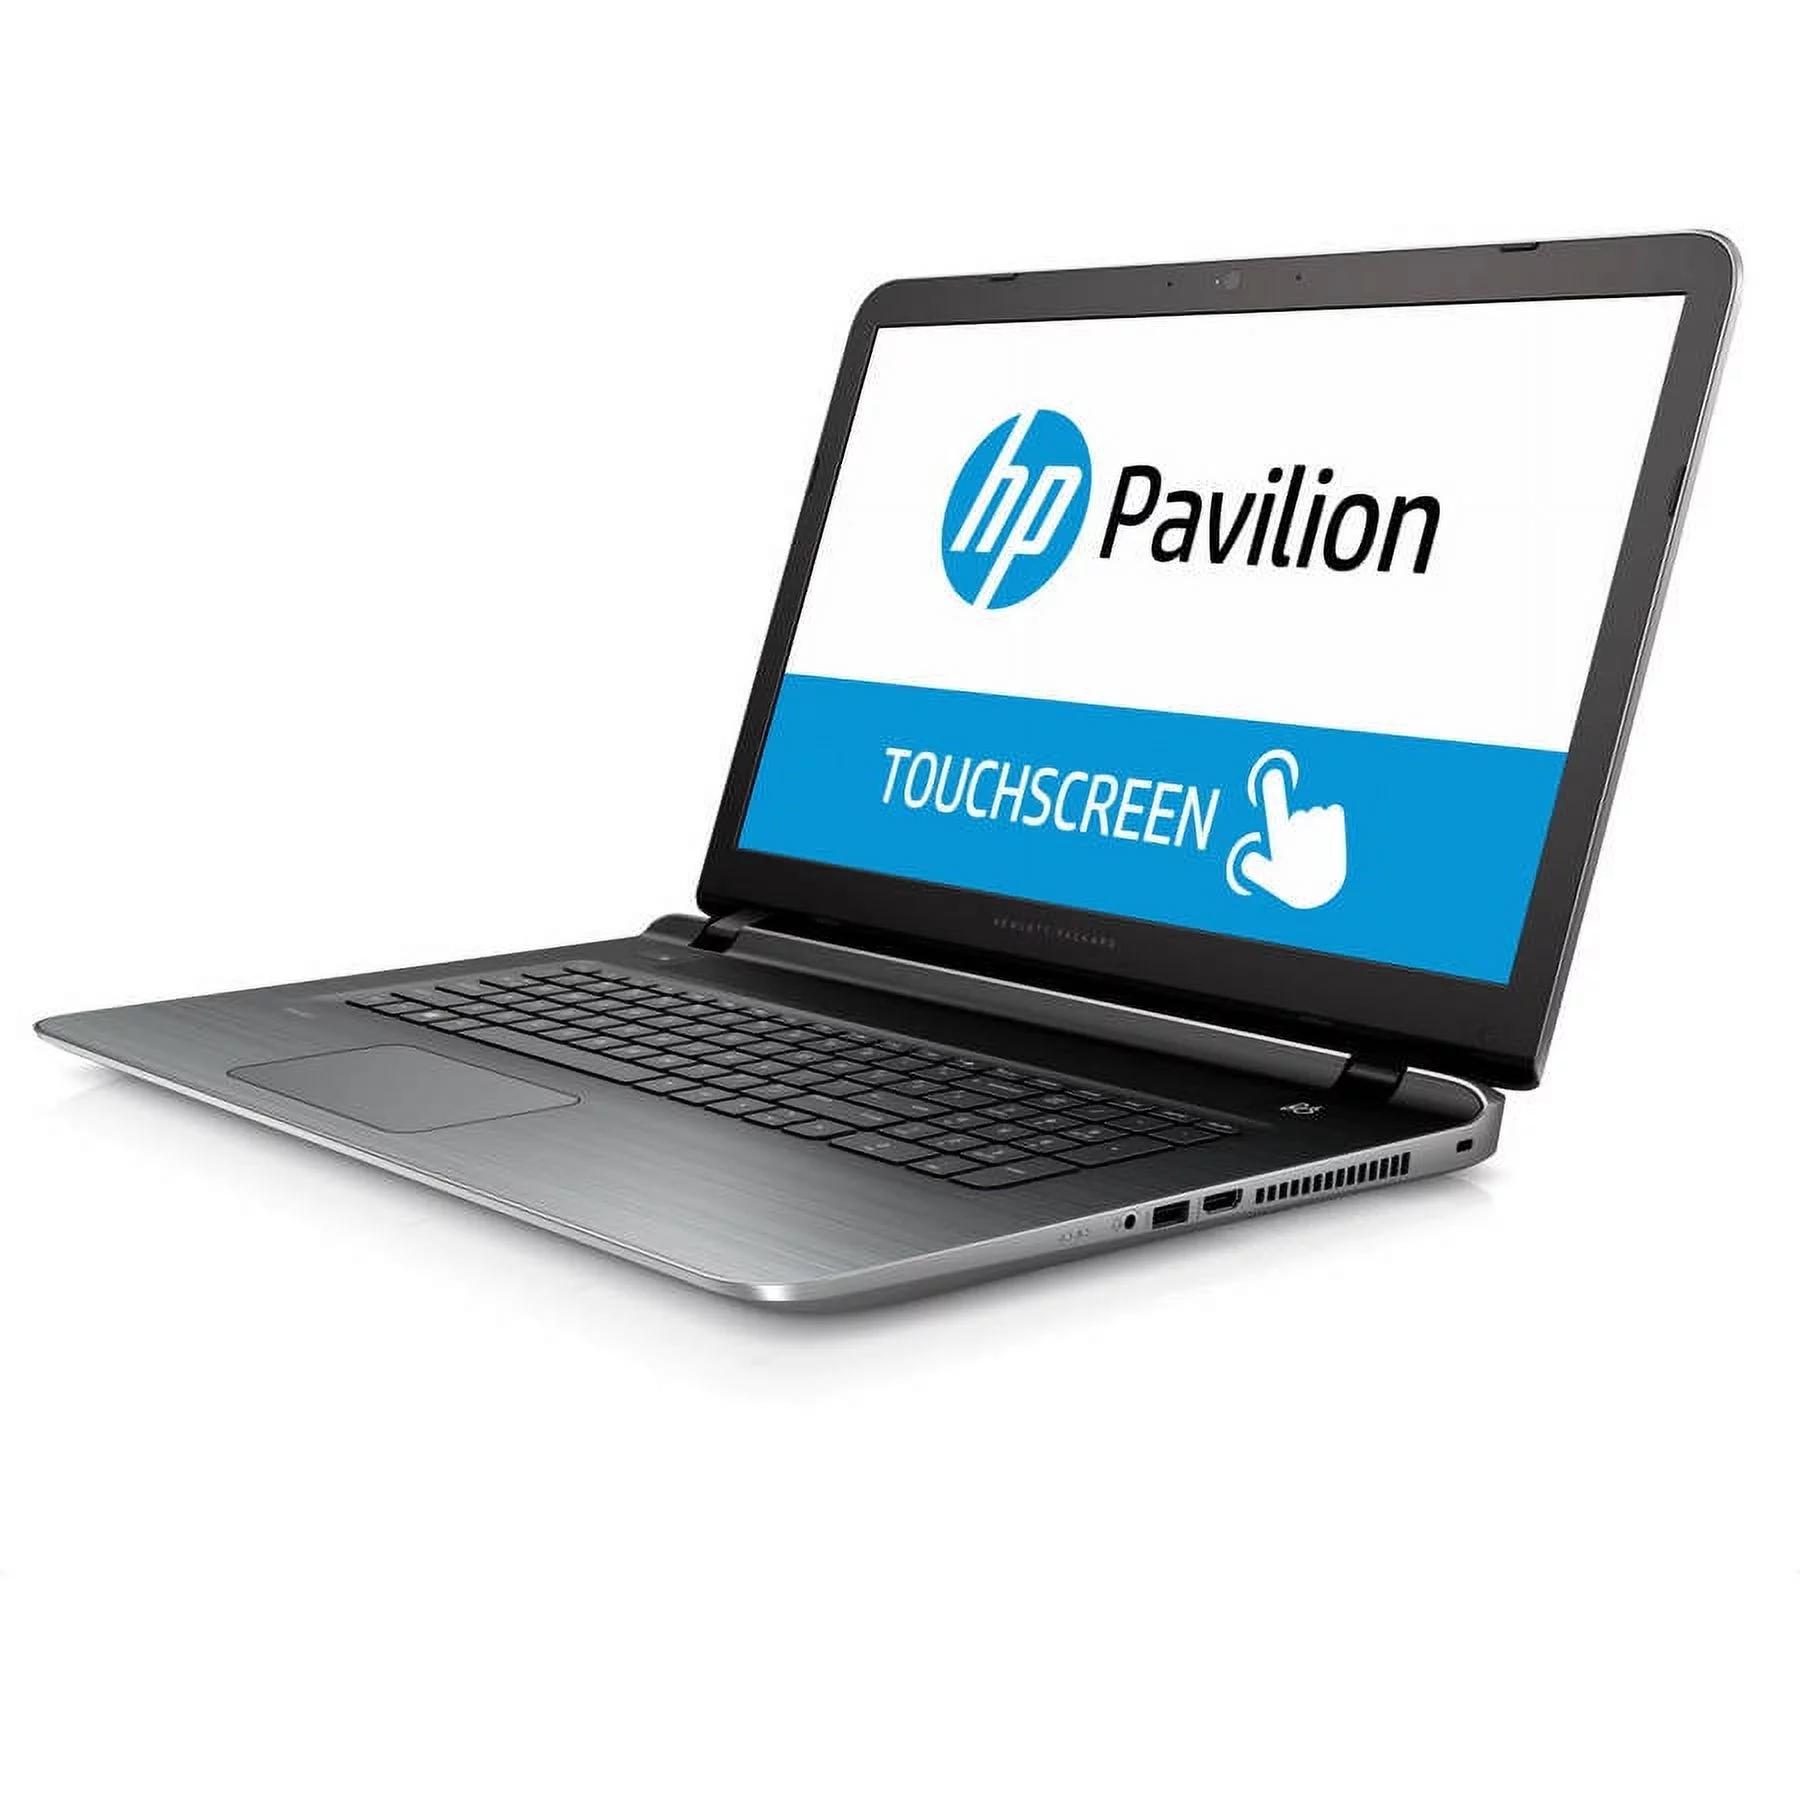 hewlett packard 17-ab010nr pavilion 6th ge - What is the spec of HP Pavilion Core i7